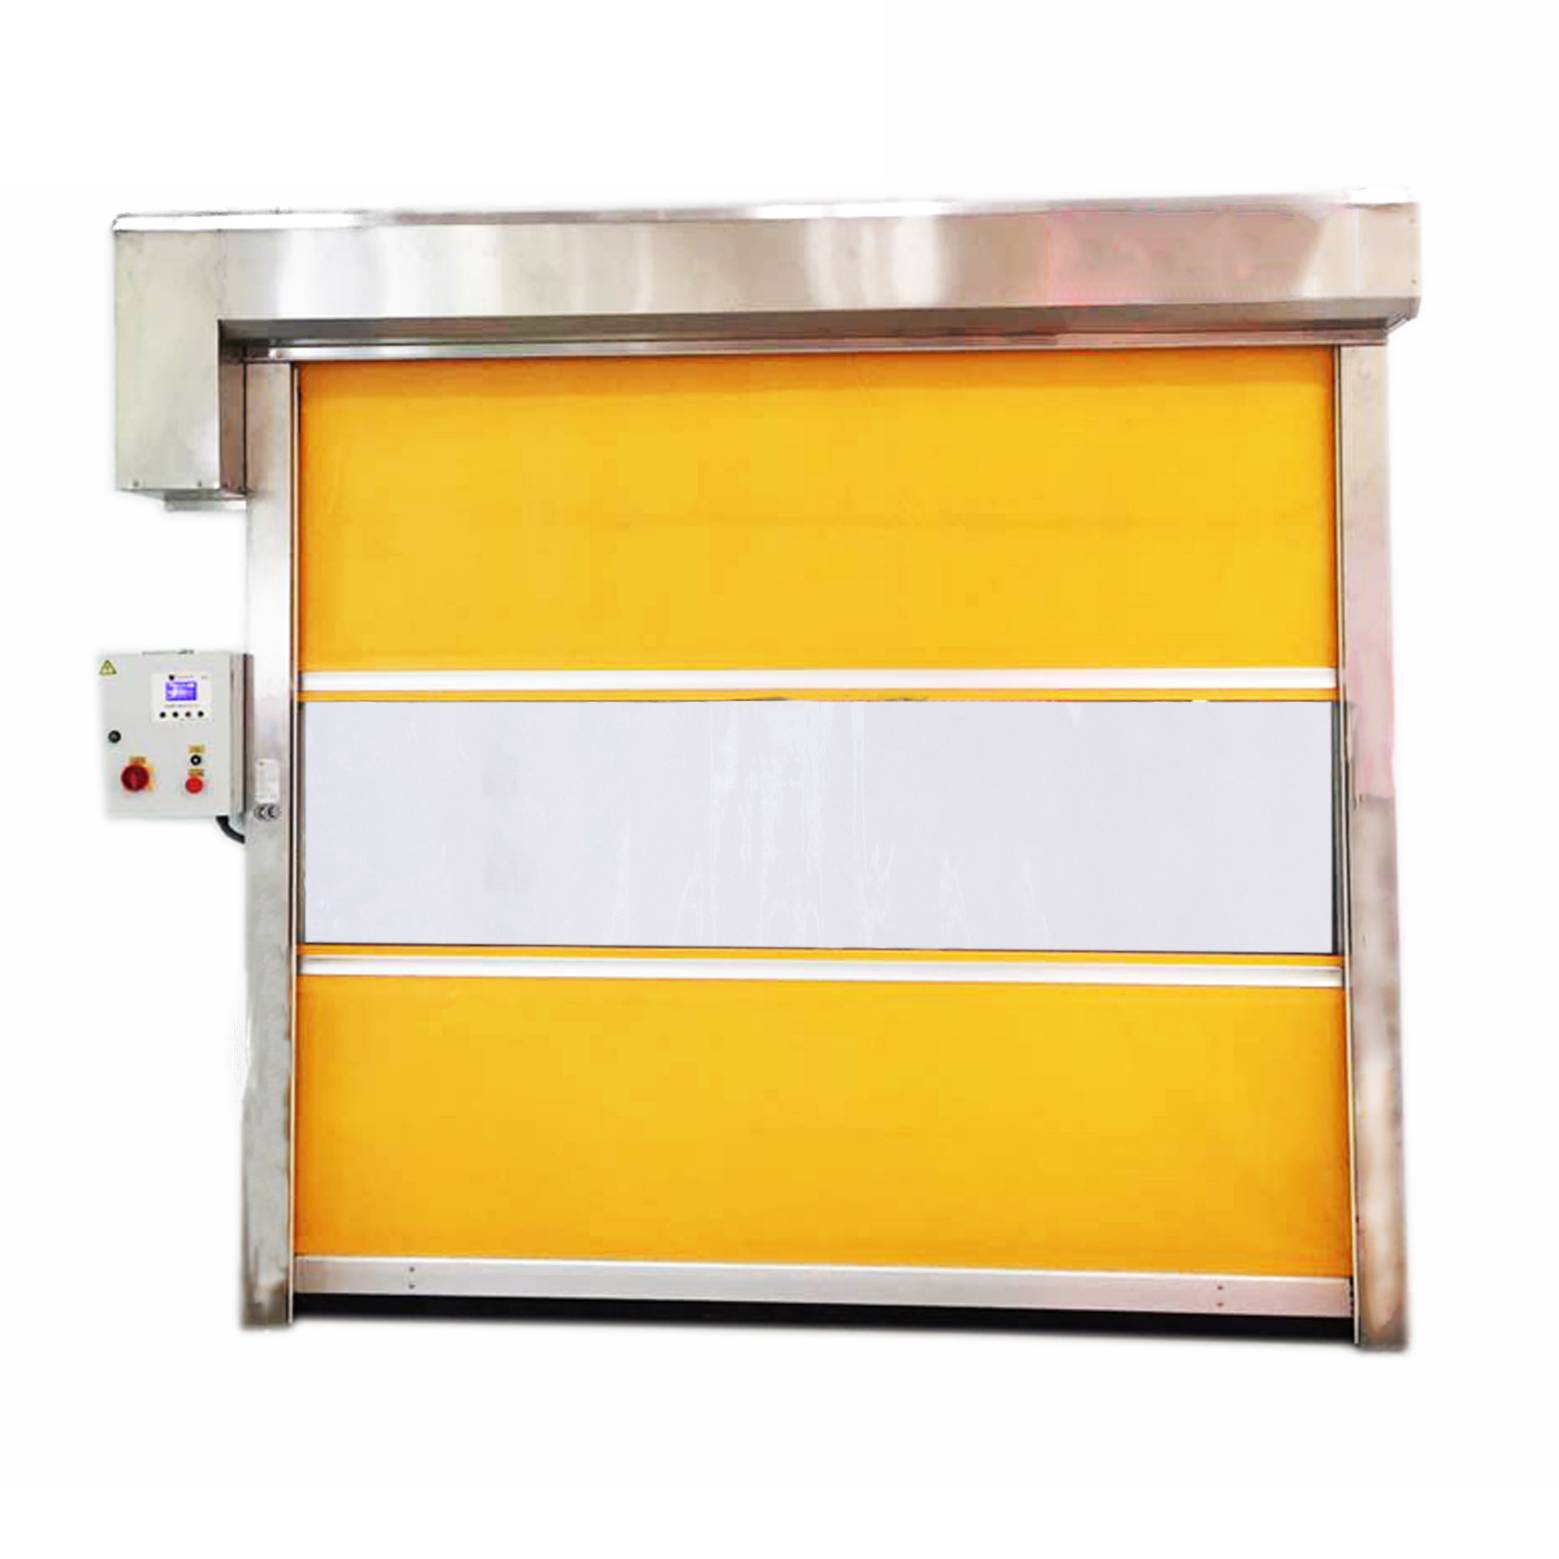 What are the advantages of rapid roll door?